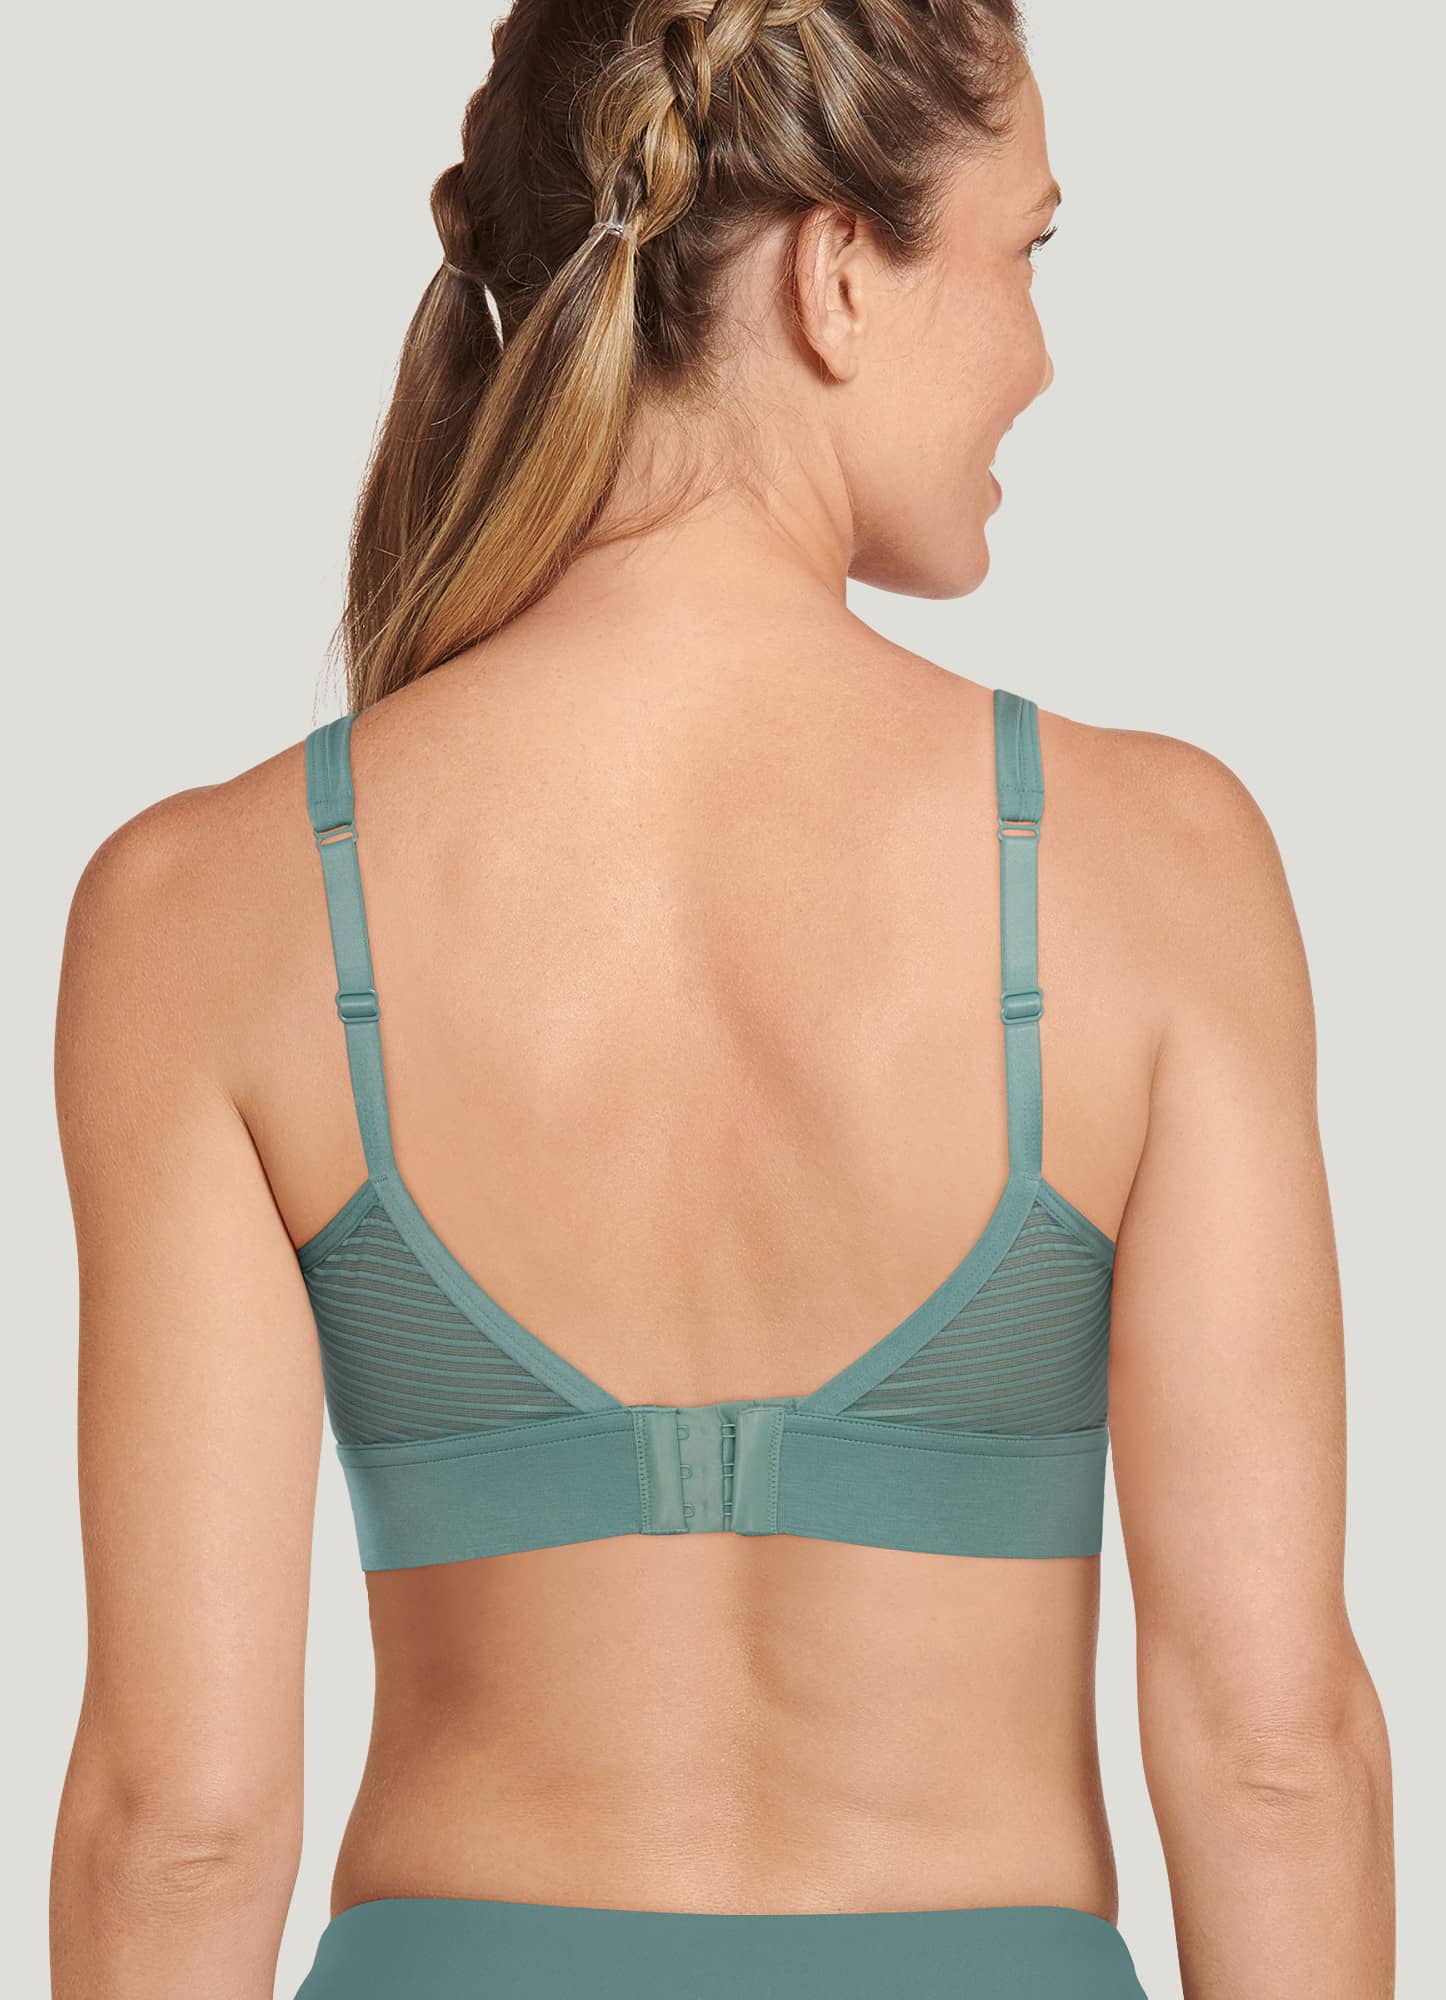 Supersoft Modal V-Neck Molded Cup Bra Wisteria Green